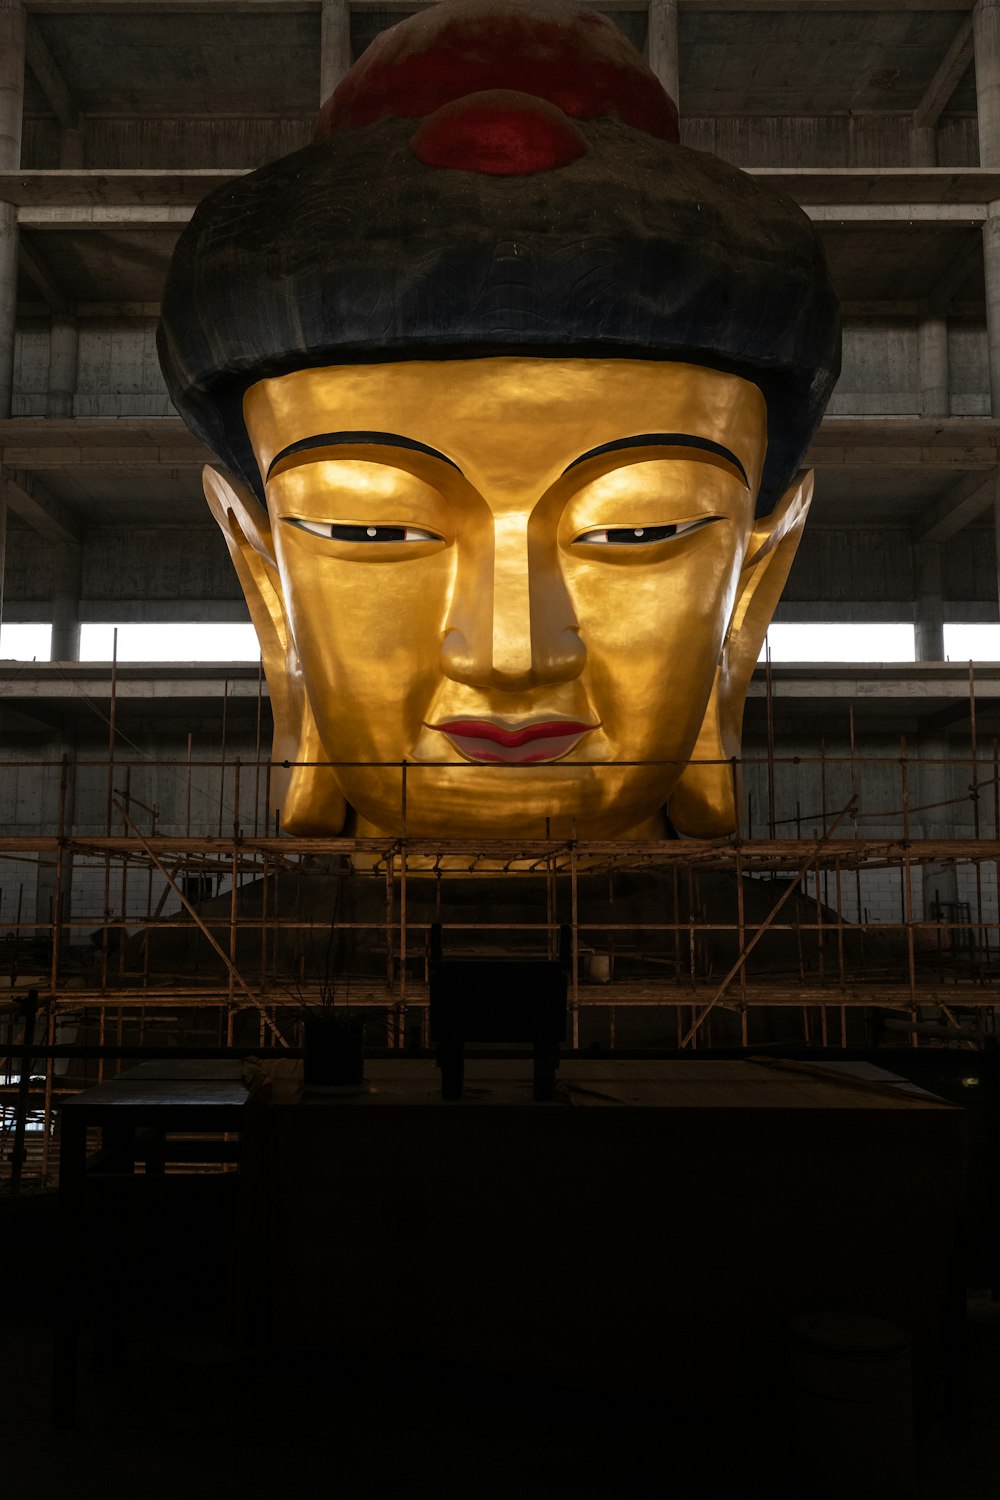 a large golden buddha statue in a large building